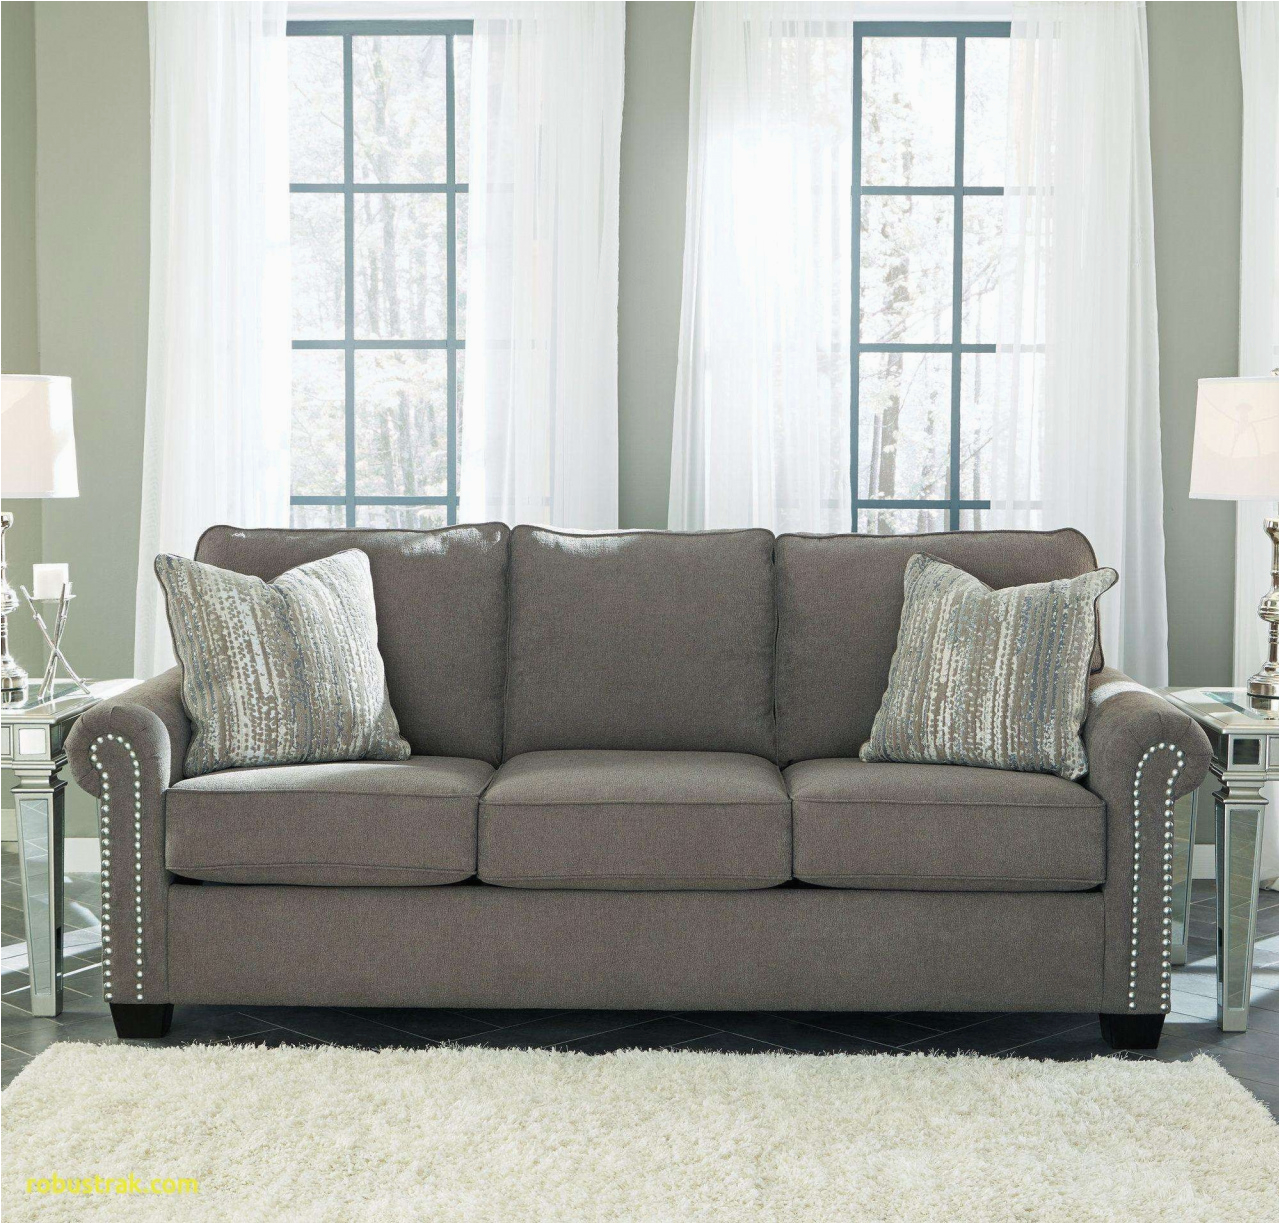 gray and brown living room brown couch living room ideas gorgeous l sofa awesome hay couch 0d durch gray and brown living room